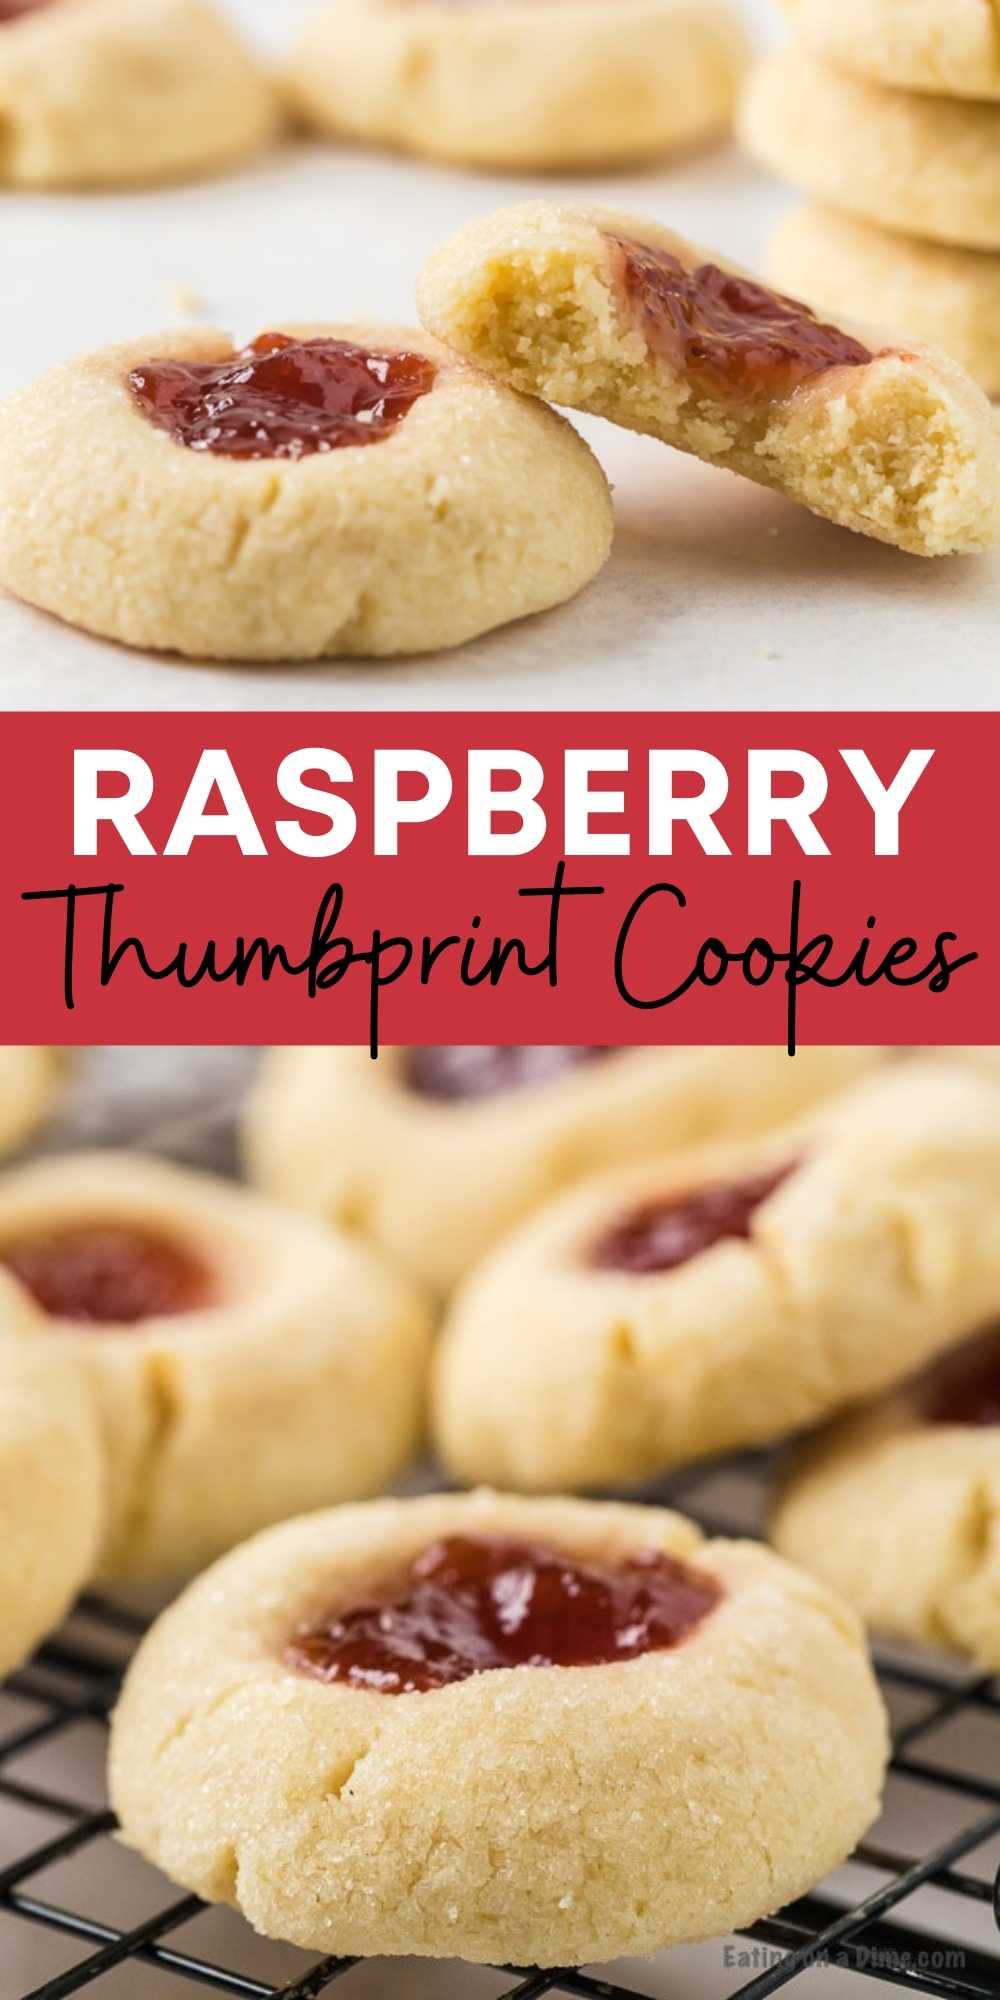 These easy to make thumbprint cookies are my favorite and the EASIEST thumbprint cookies. These cookies are soft and filled with your favorite type of preserves. These classic thumbprint cookies are the perfect easy recipe for the holidays or any occasion! This is one of my favorite cookie recipes.  #eatingonadime #cookierecipes #Christmasbakingrecipe #holidayrecipe #thumbprintcookie
